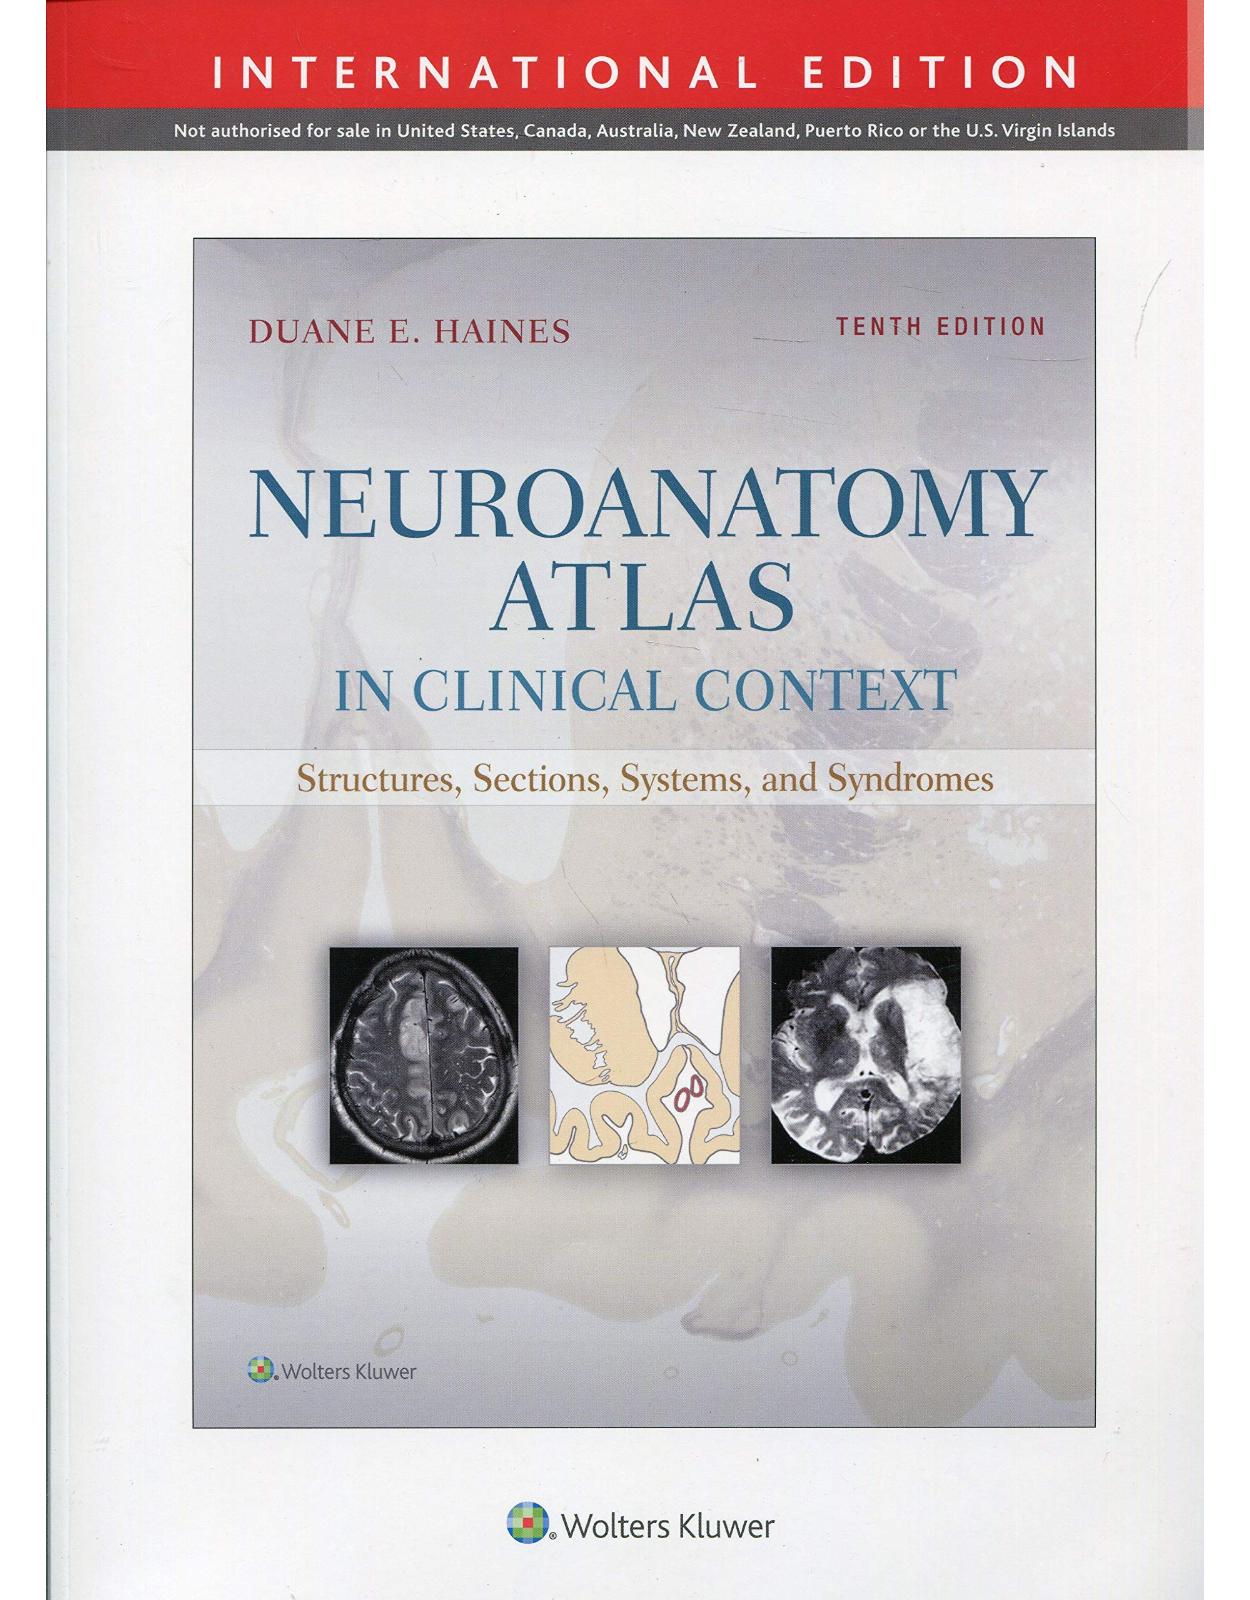 Neuroanatomy Atlas in Clinical Context: Structures, Sections, Systems, and Syndromes( TENTH EDITION)